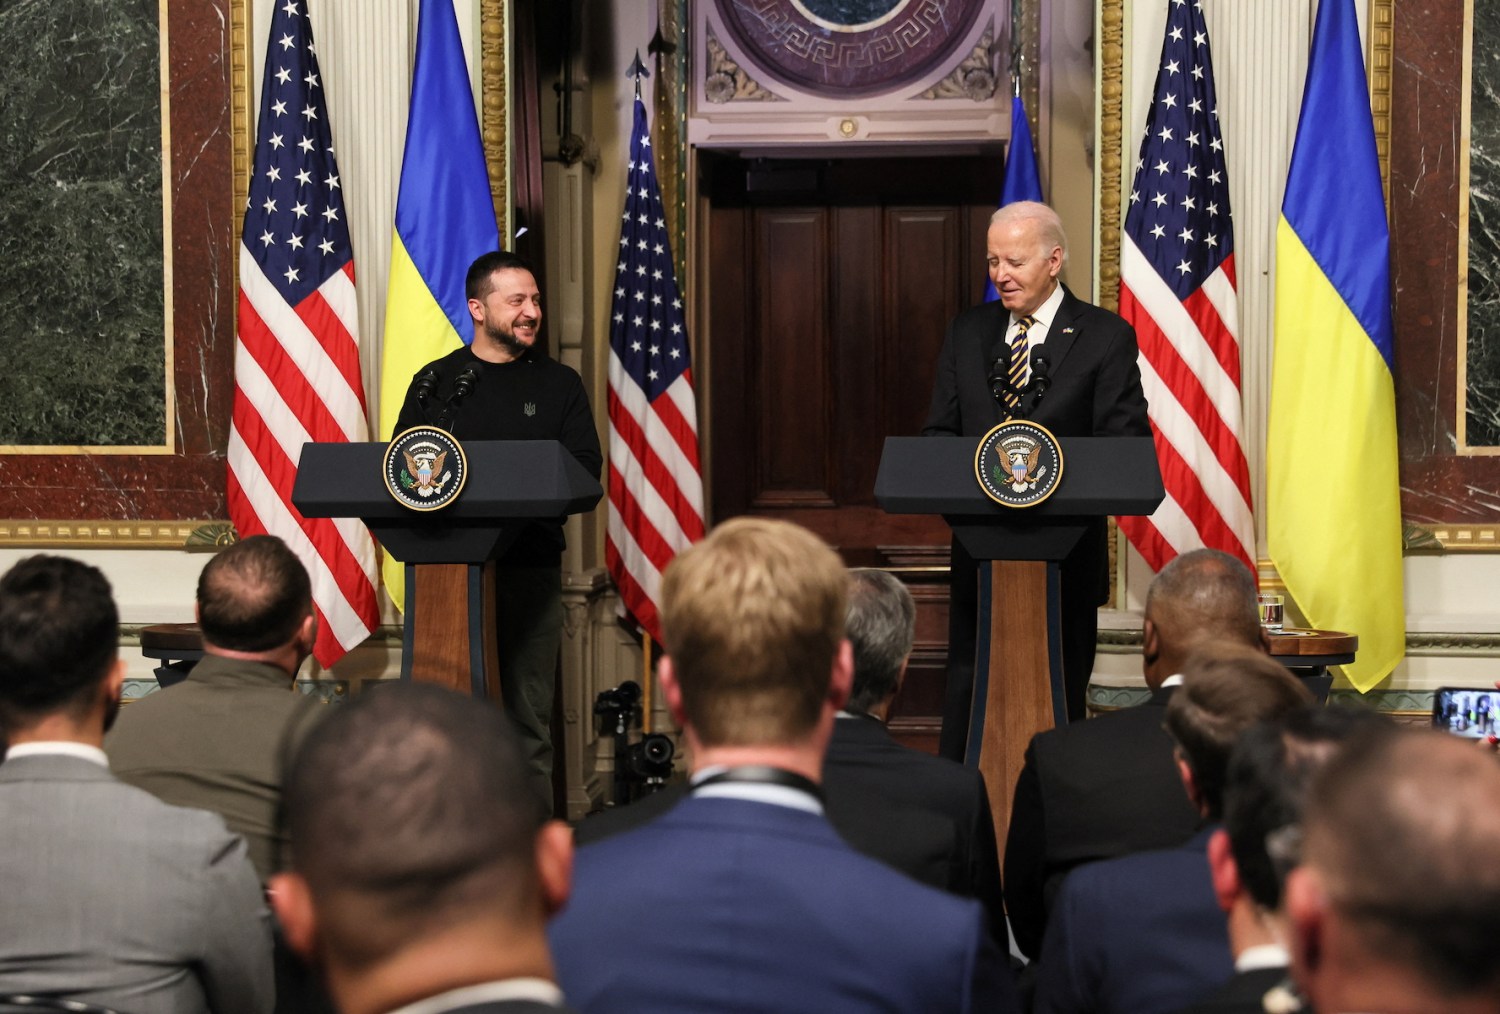 U.S. President Joe Biden and Ukraine's President Volodymyr Zelenskiy react during a joint press conference at the White House in Washington, U.S., December 12, 2023.